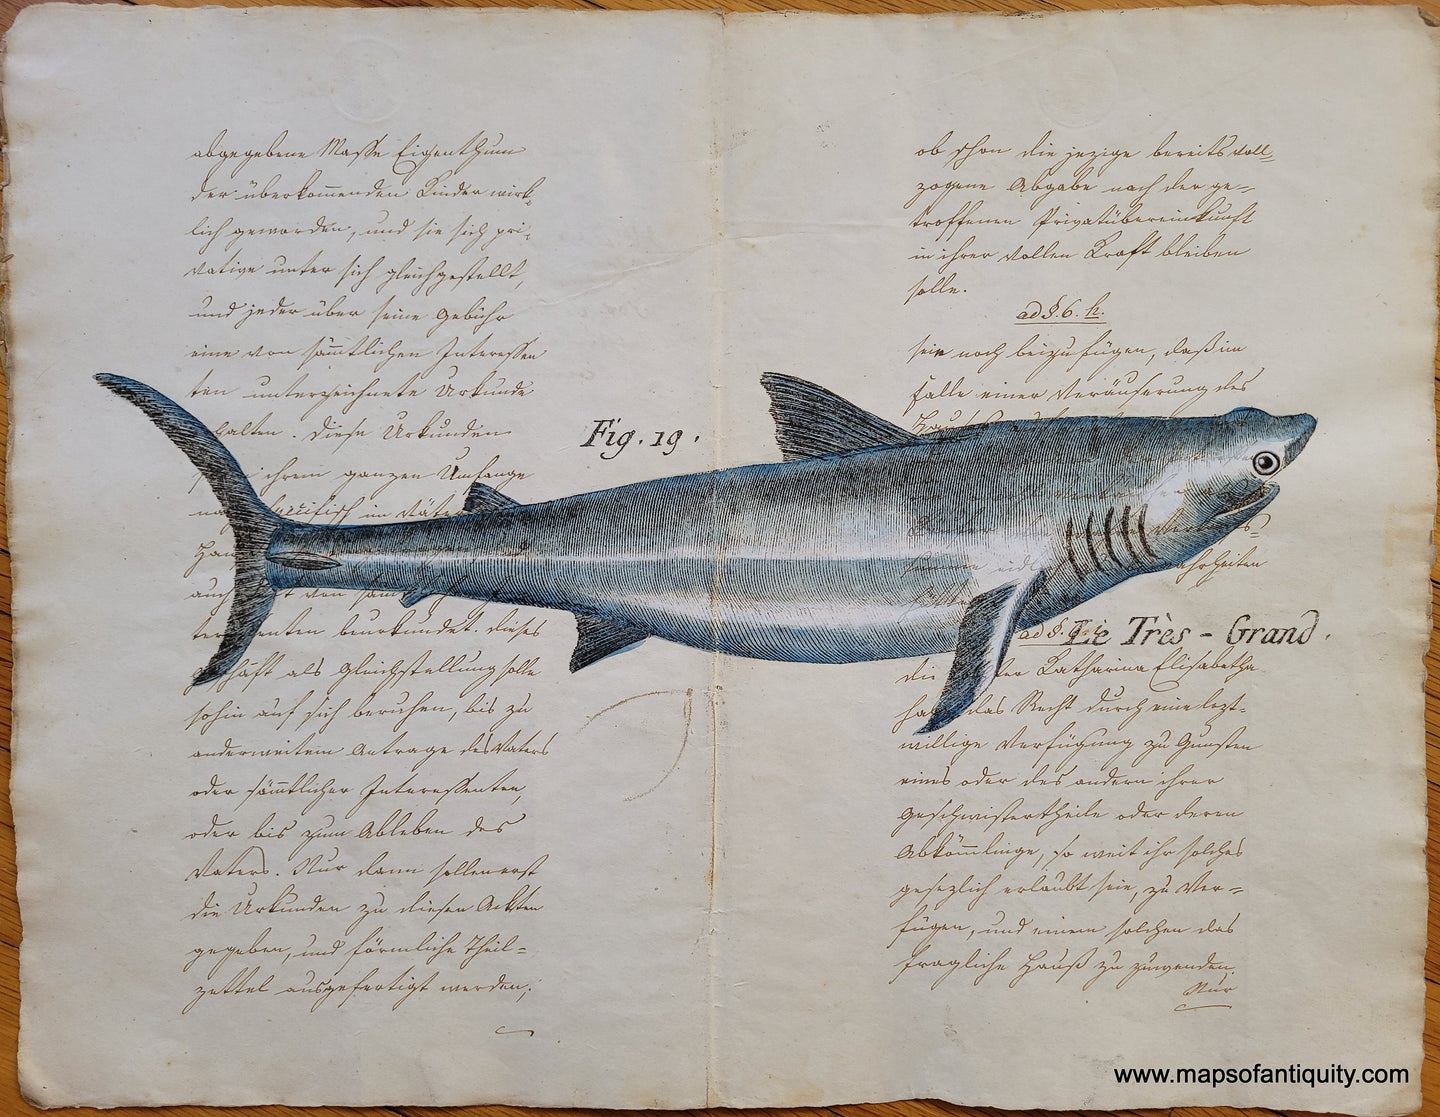 Specialty-Hand-Made-Reproduction-on-Antique-Paper-Le-Tres-Grand-Shark---Reproduction-Maps-Of-Antiquity